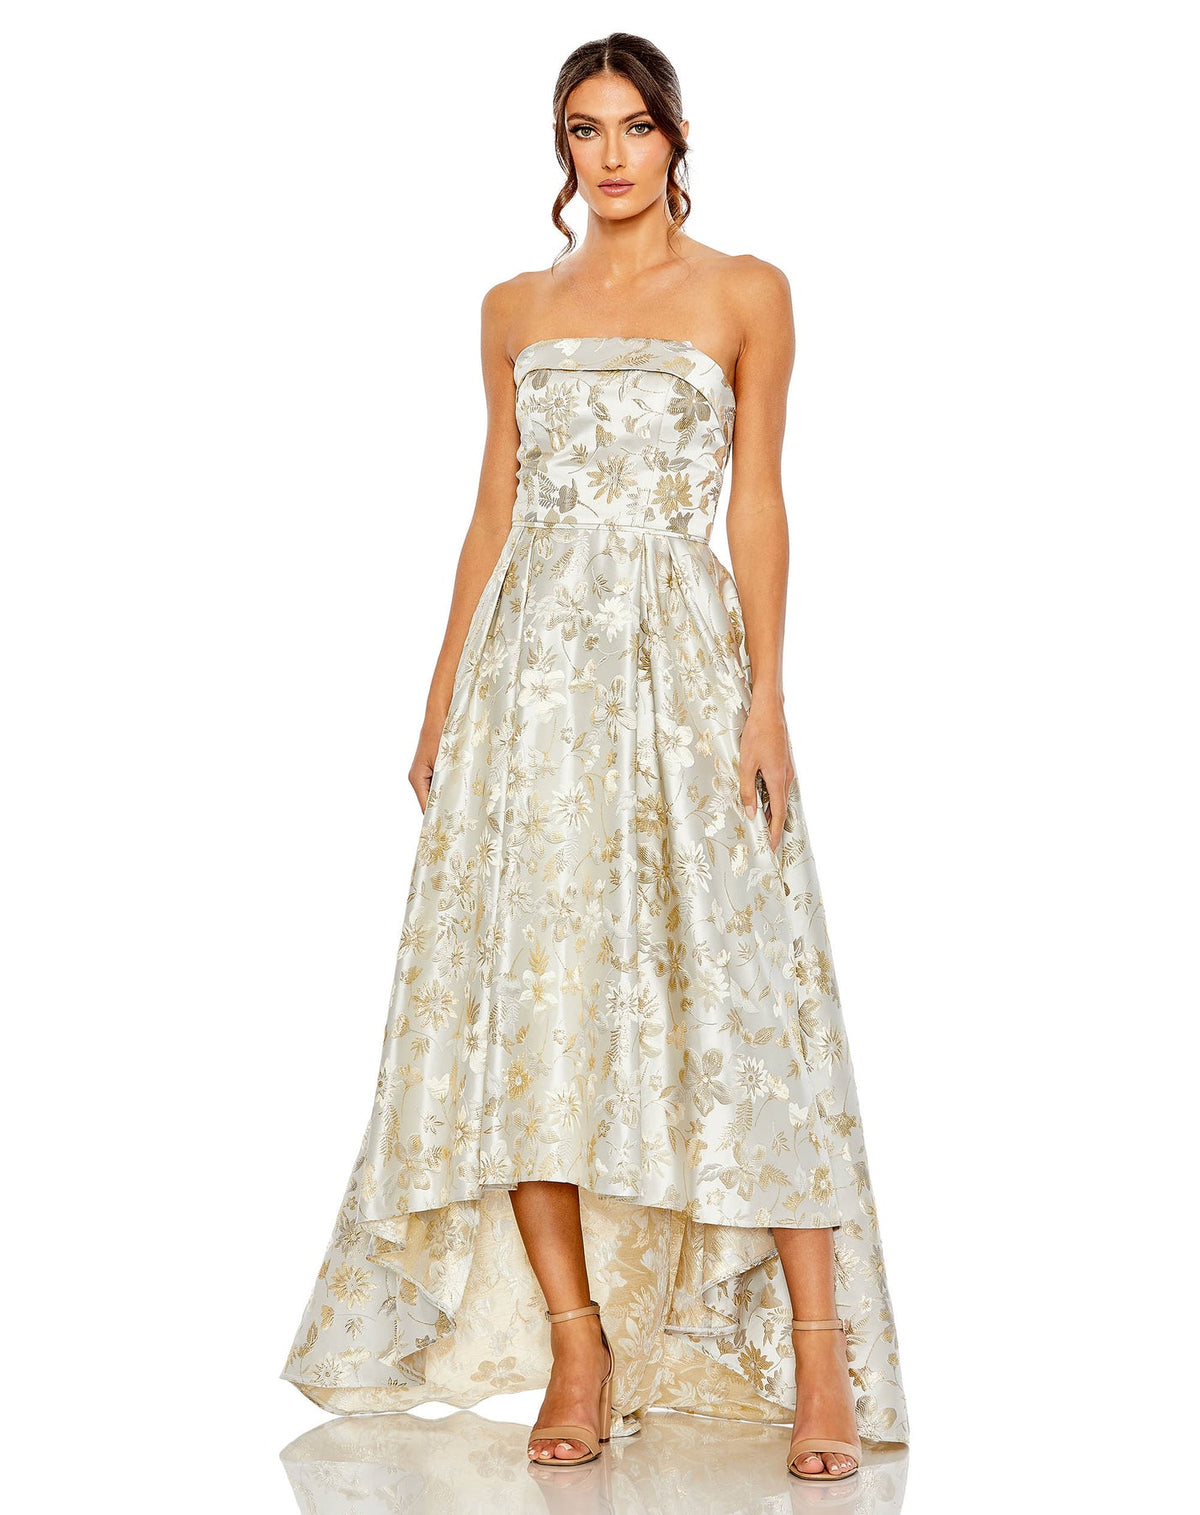 mac duggal, Brocade strapless floral  Style #49619 high low gown - White, 